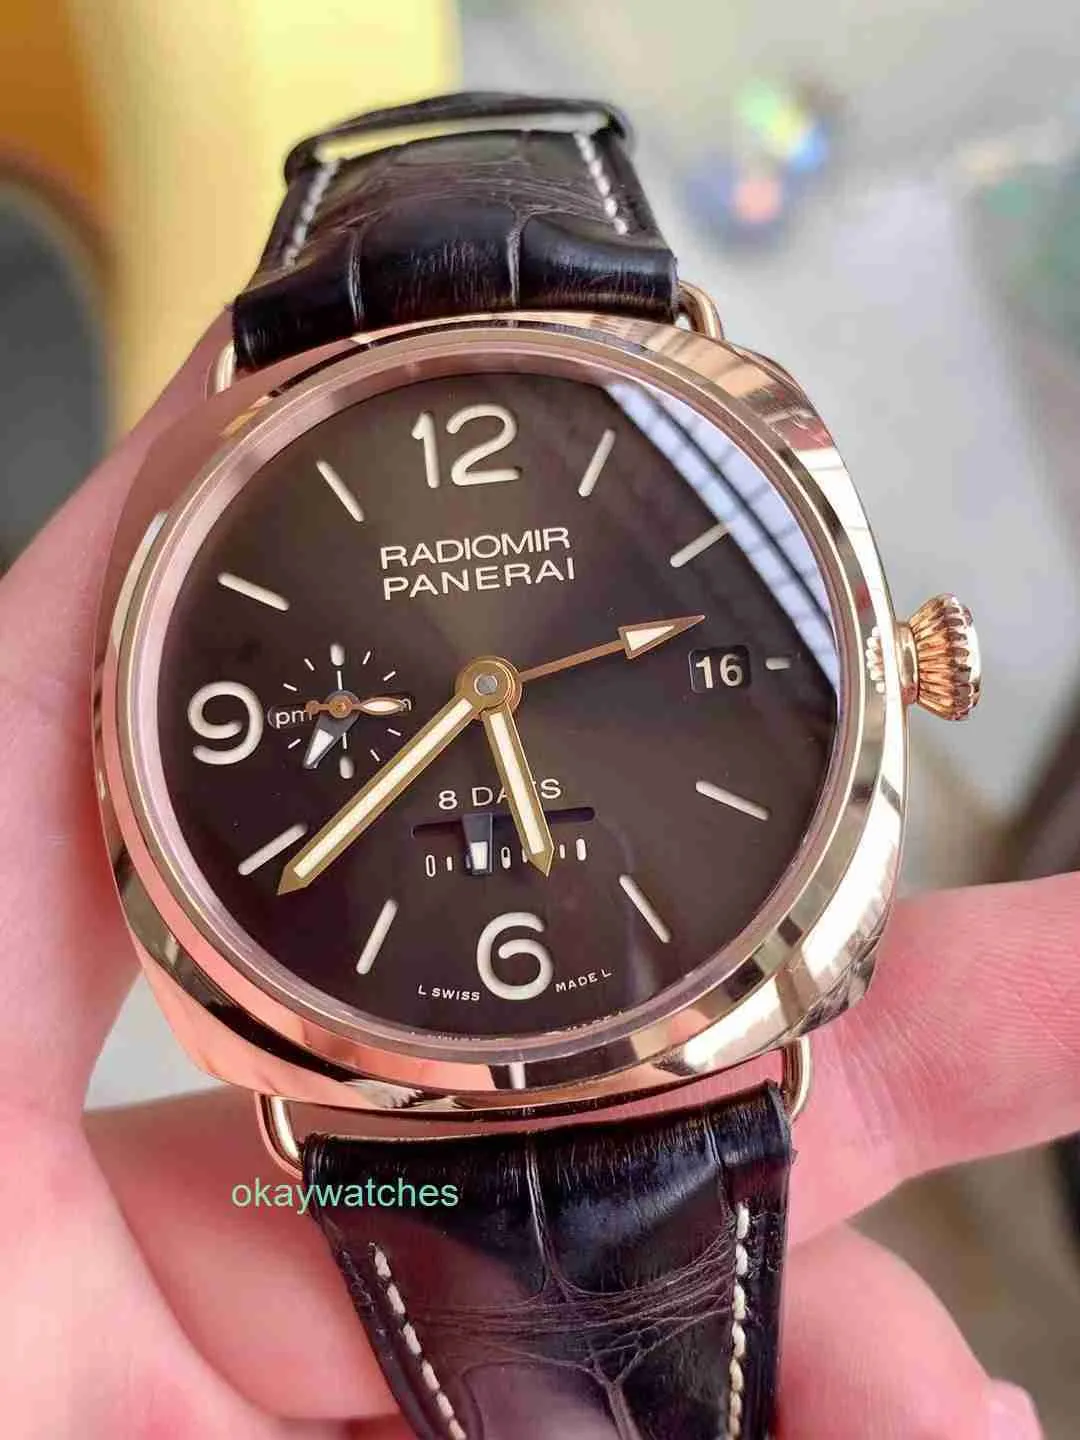 Fashion luxury Penarrei watch designer a New Special Edition PAM00395 Manual Mechanical Mens Watch 45mm